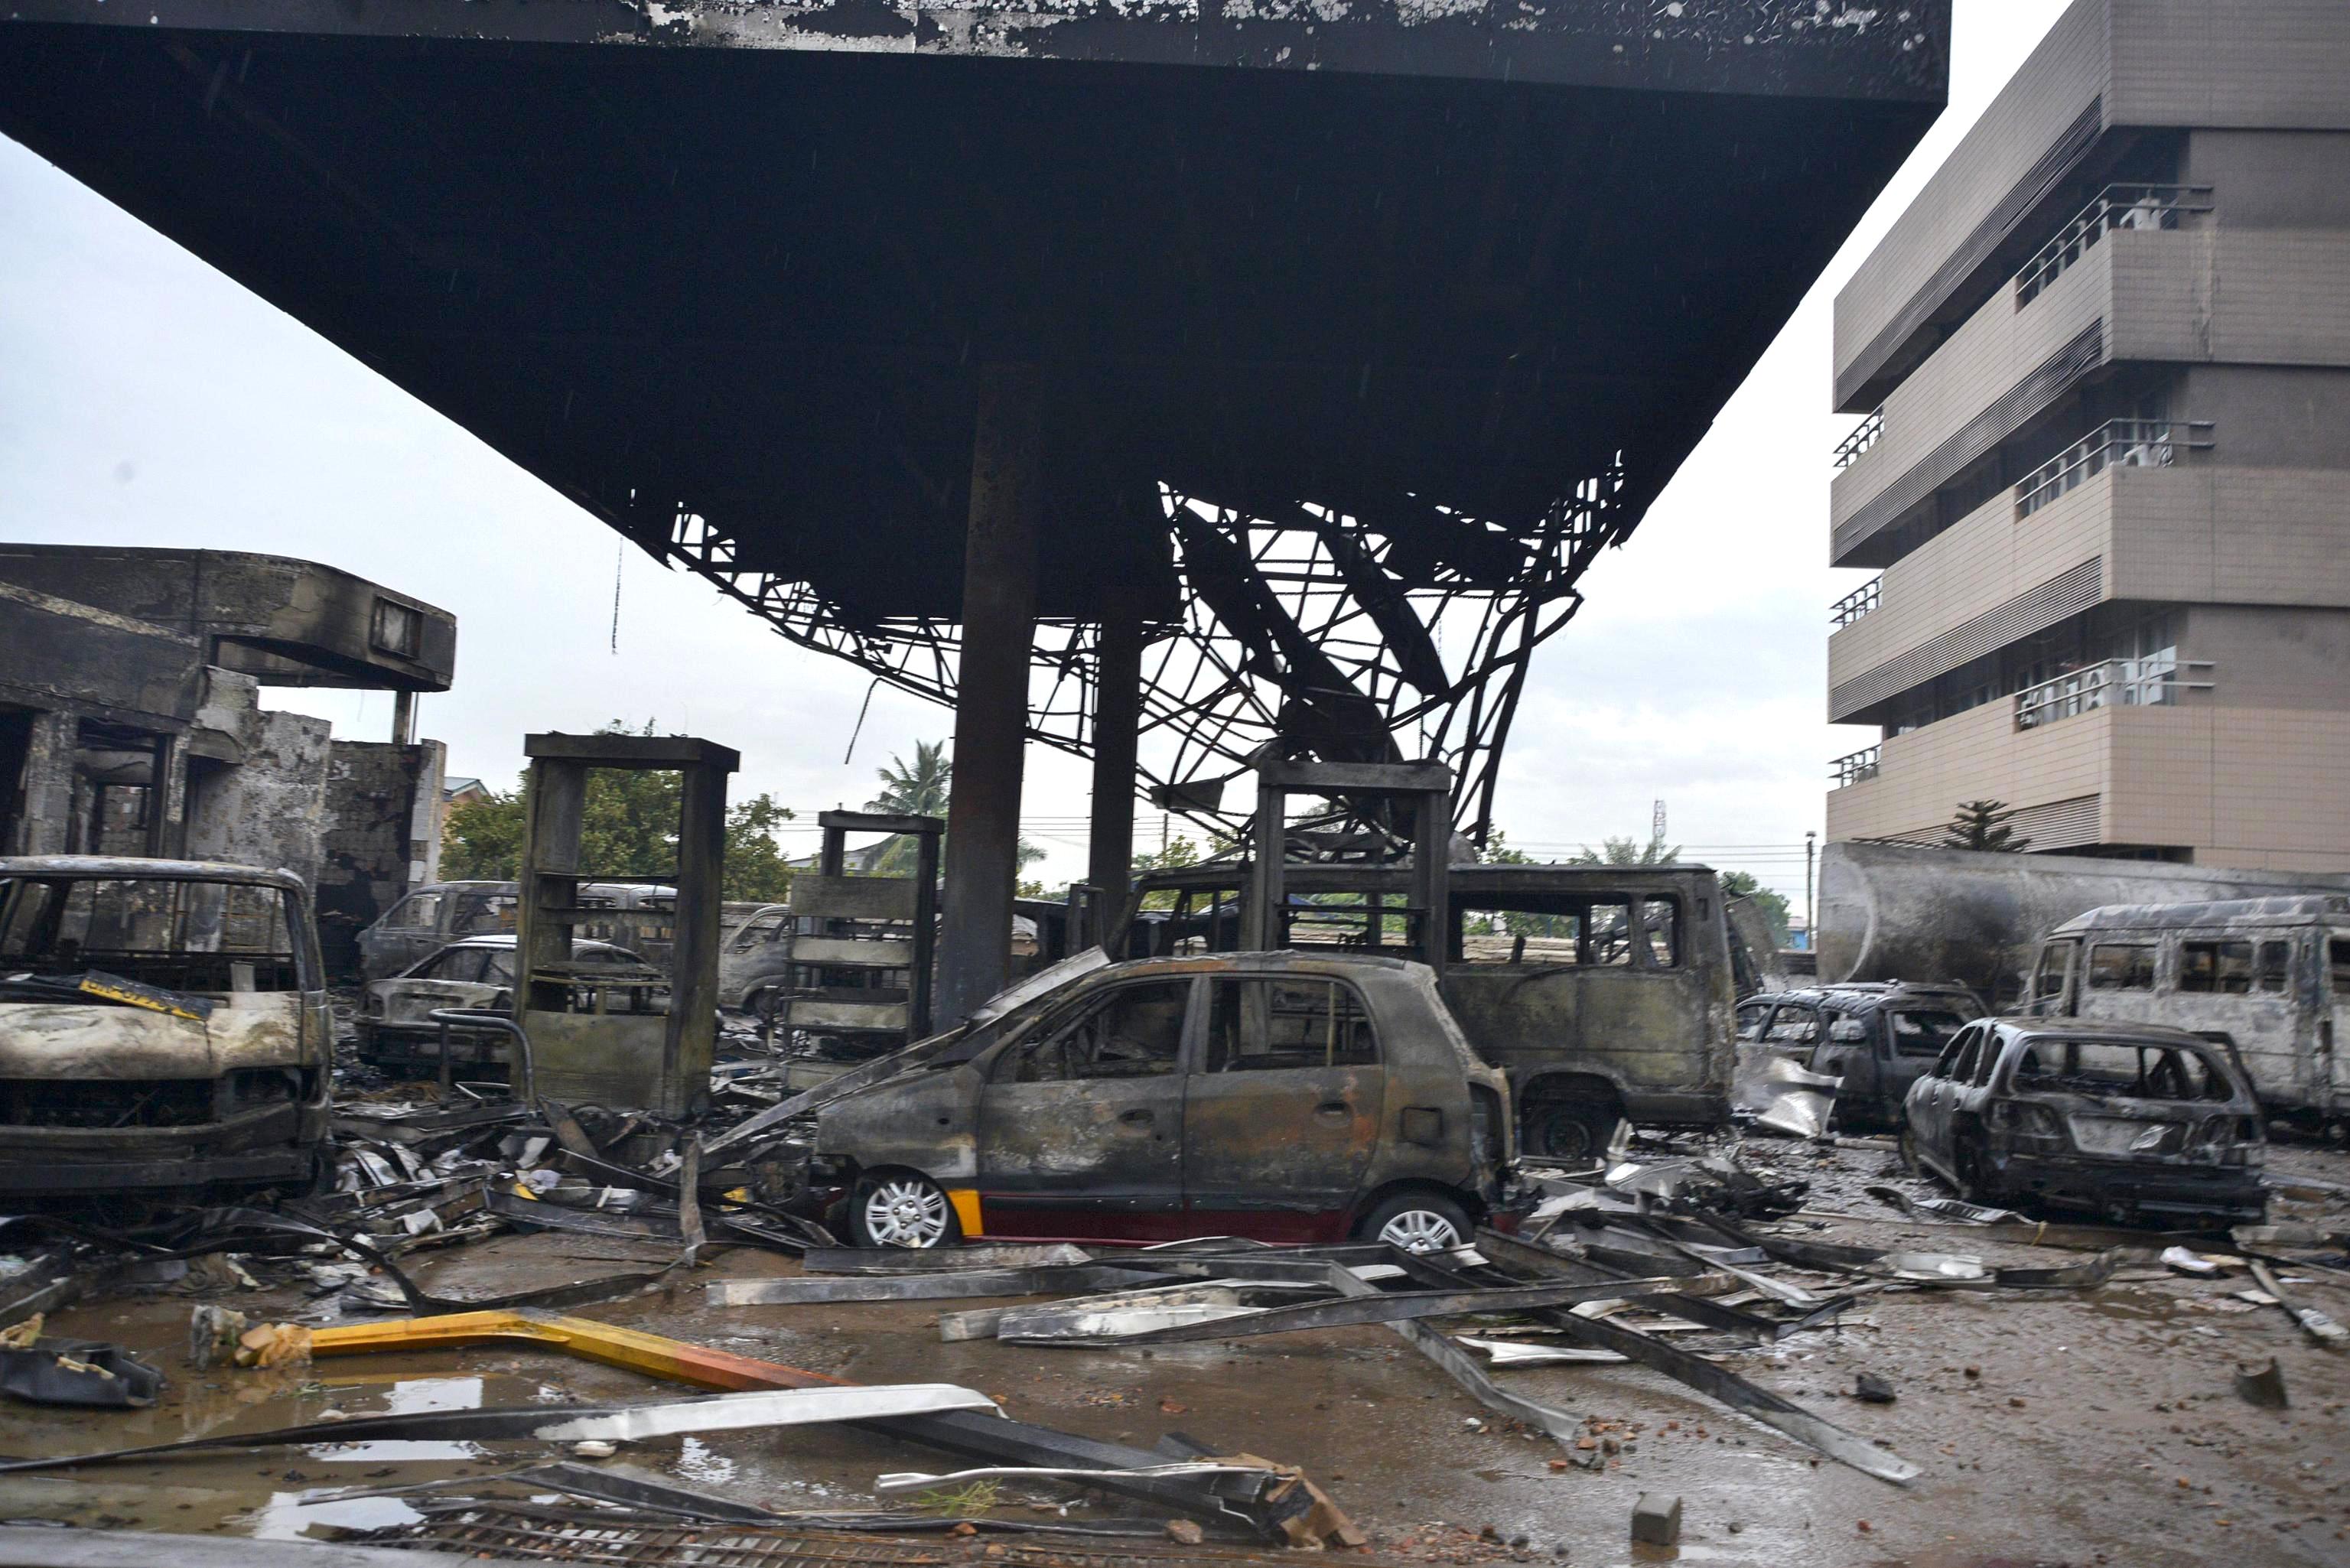 Some 150 people have died in a massive fire at a petrol station in Ghana's capital Accra